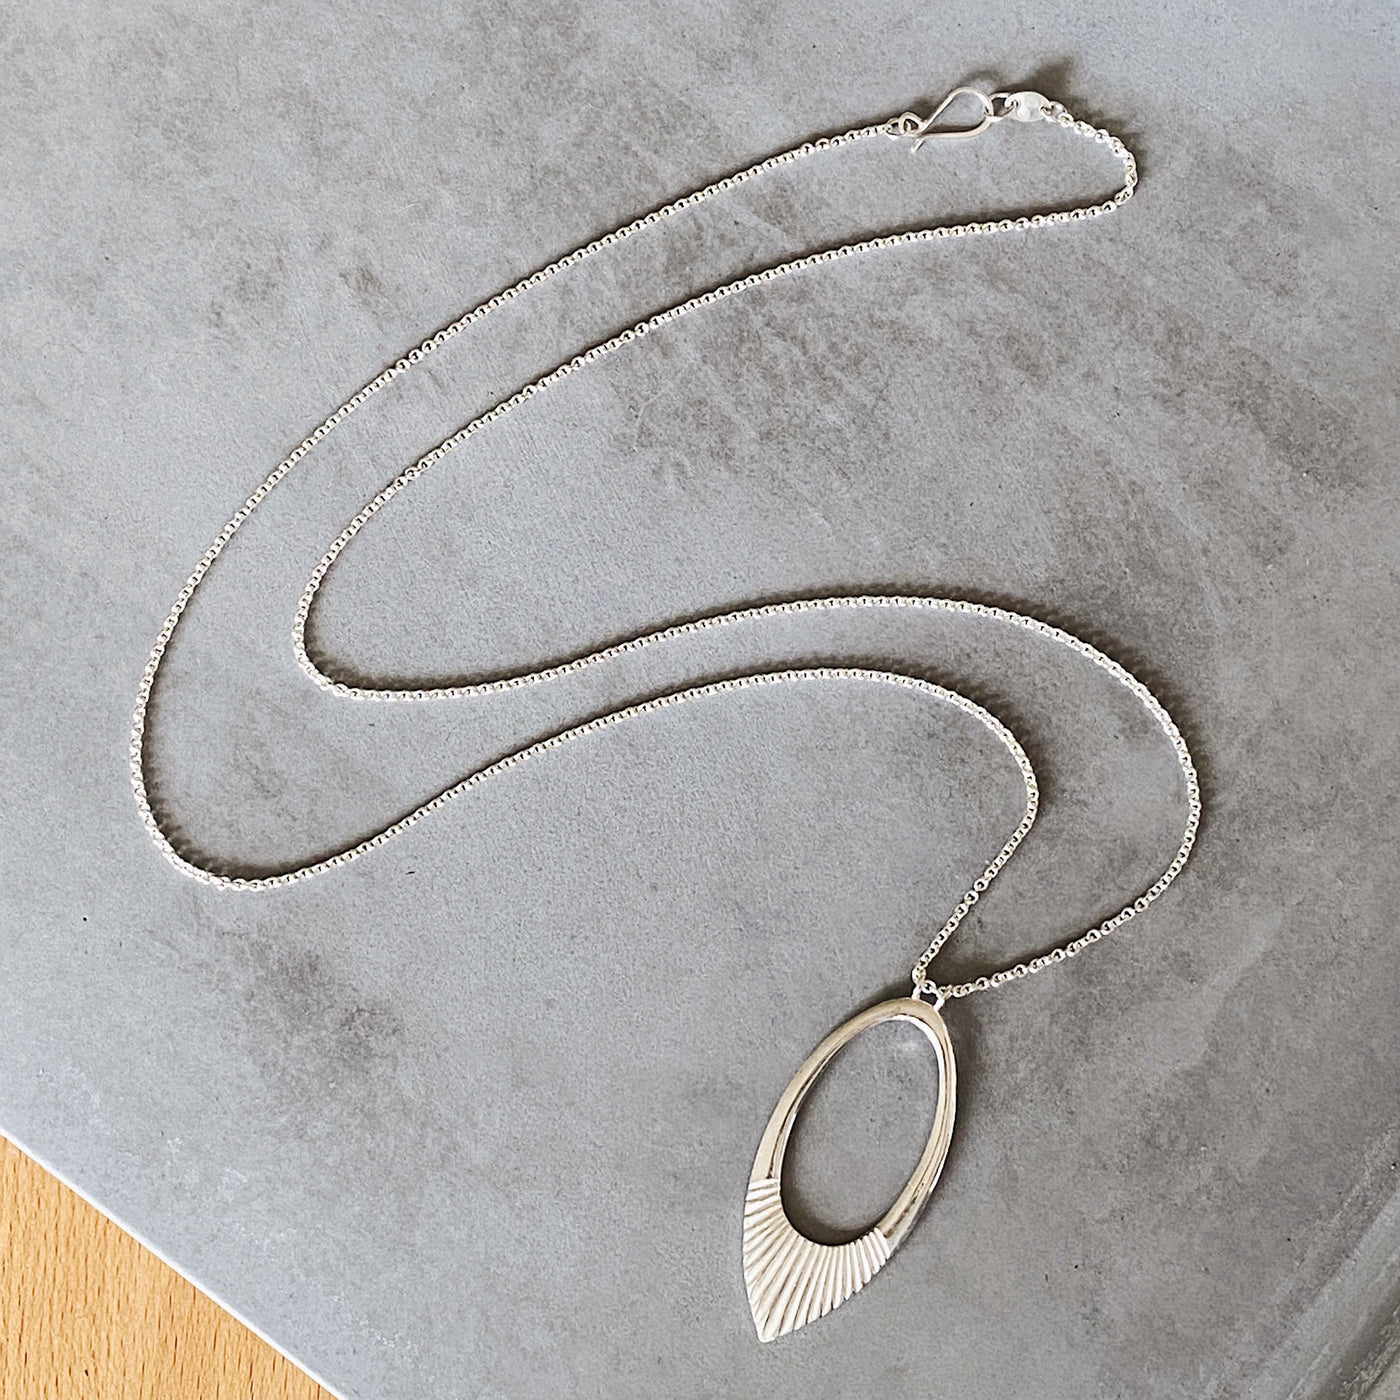 Extra long silver neckalce with large open petal shape pendant with carved ray texture across the bottom